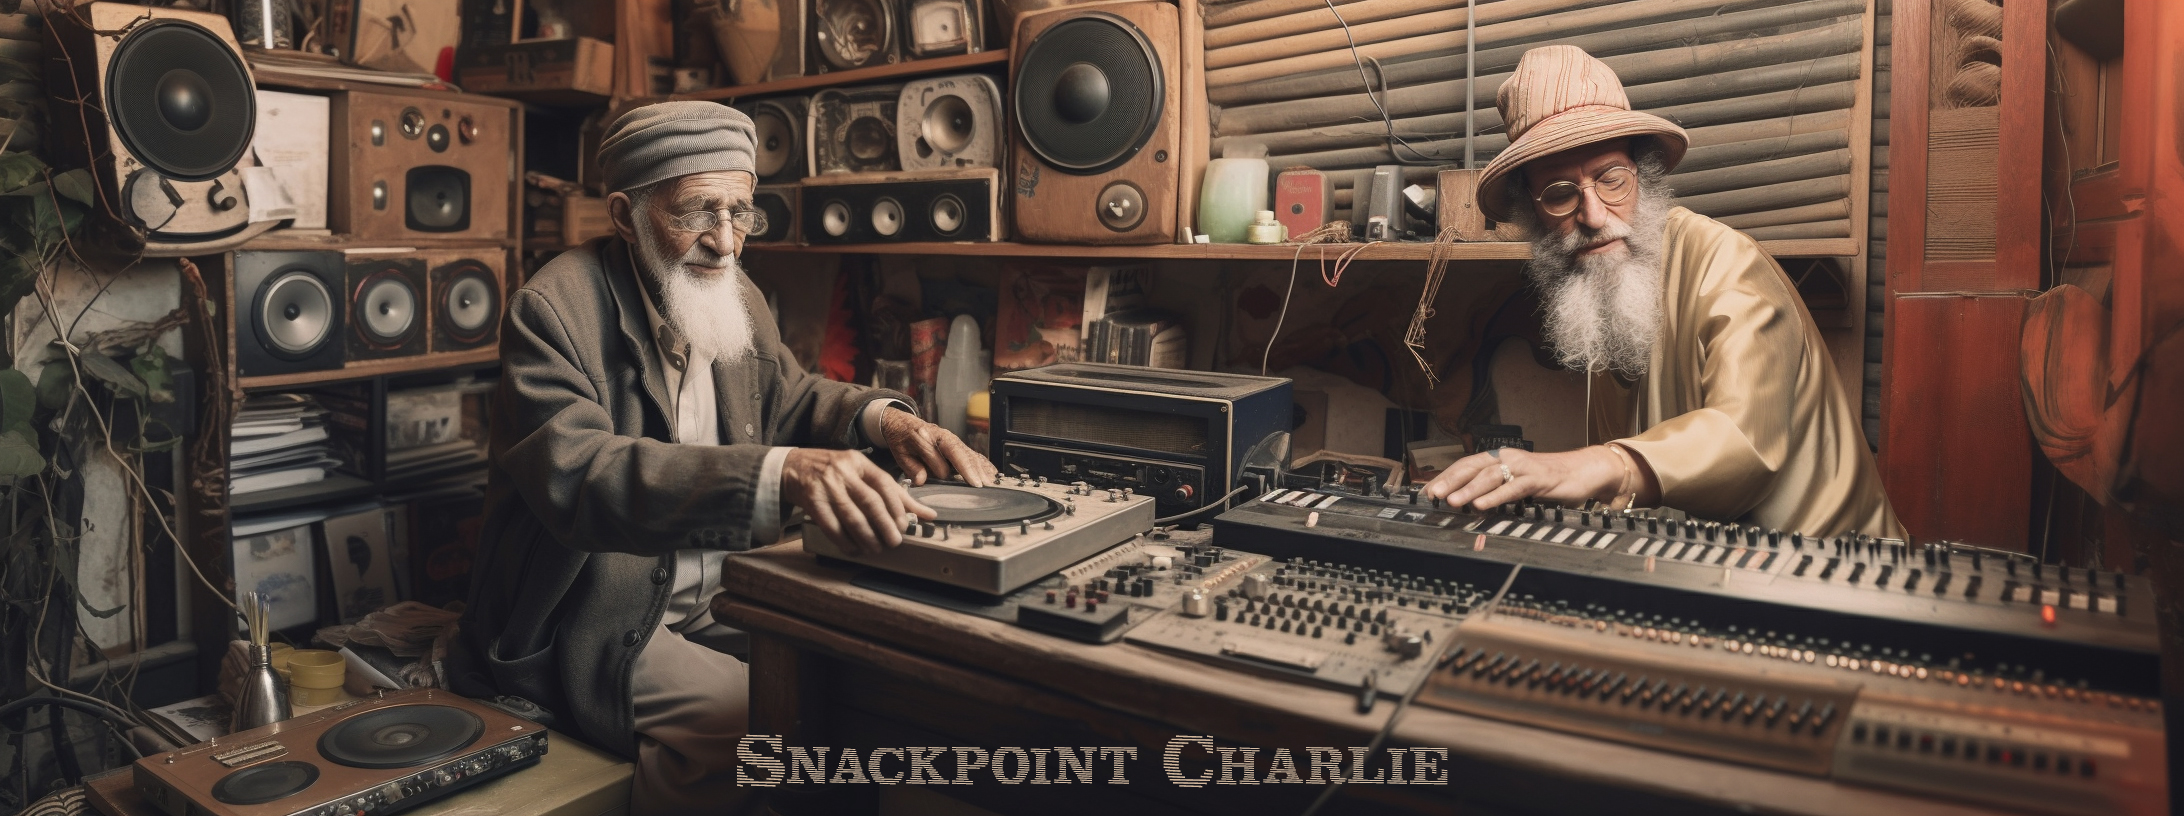 Snackpoint Charlie. Every 1st & 3rd Wednesday from 10pm-Midnight. WXC 90.7-FM Hudson/Catskill/Acra